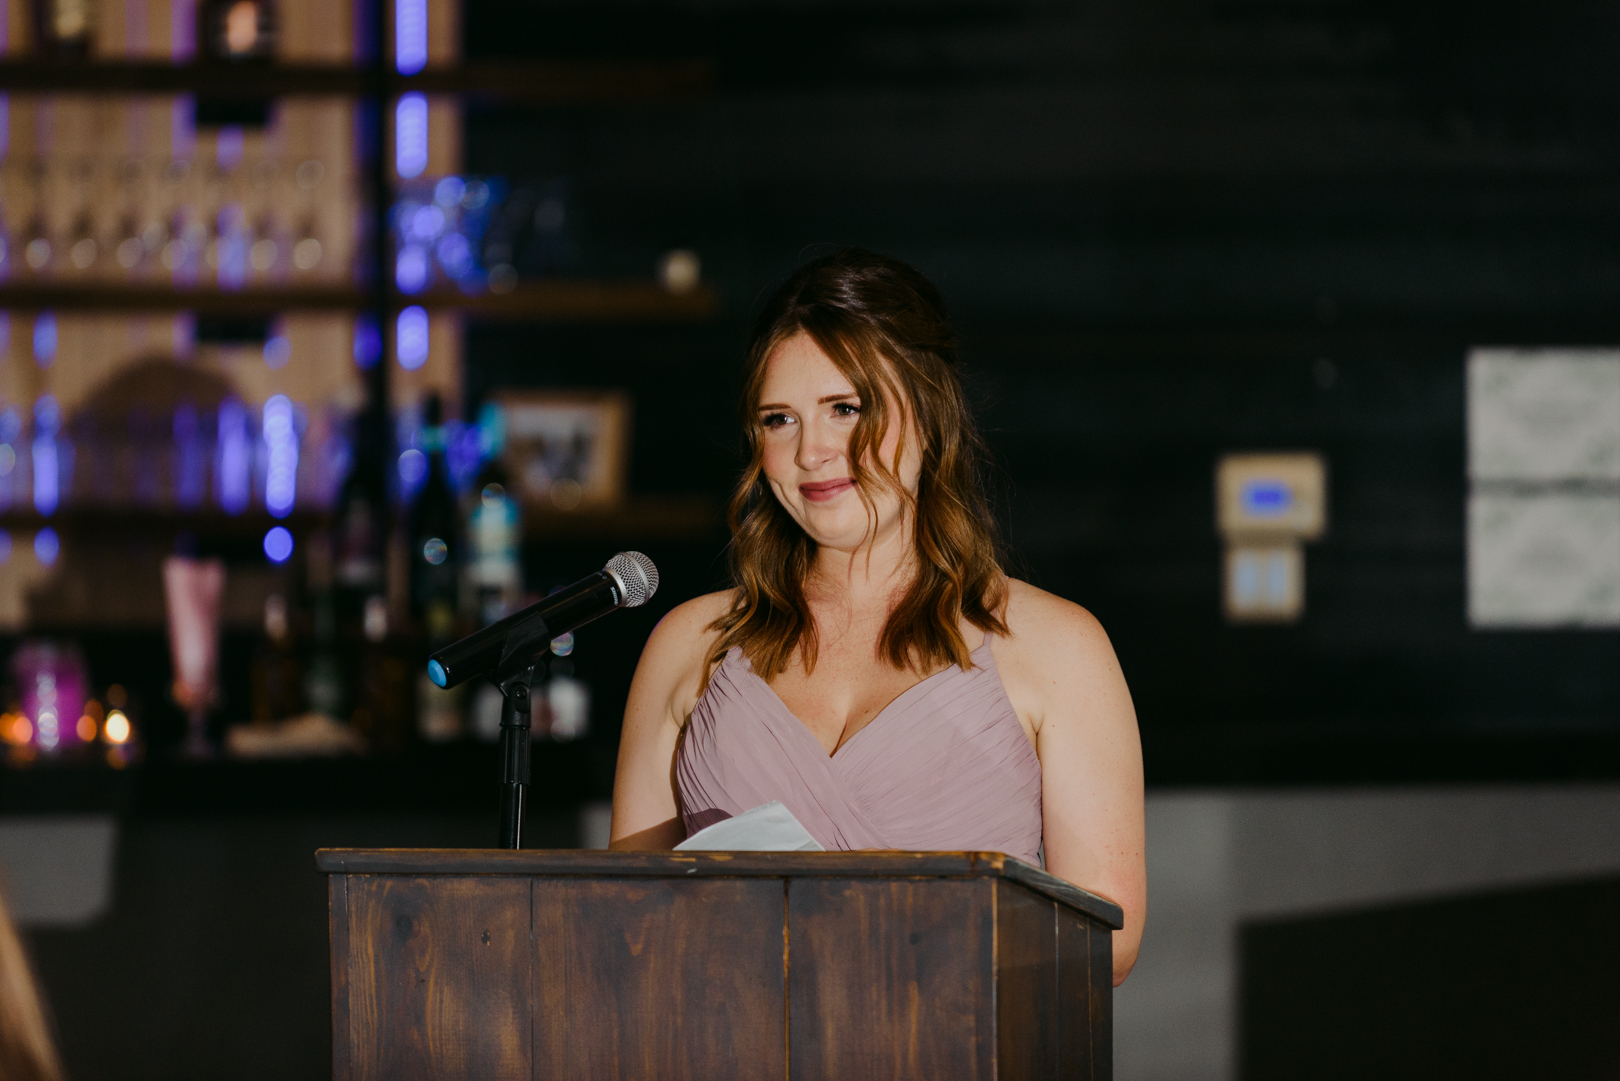 maid of honour speech at le belvedere during wedding reception